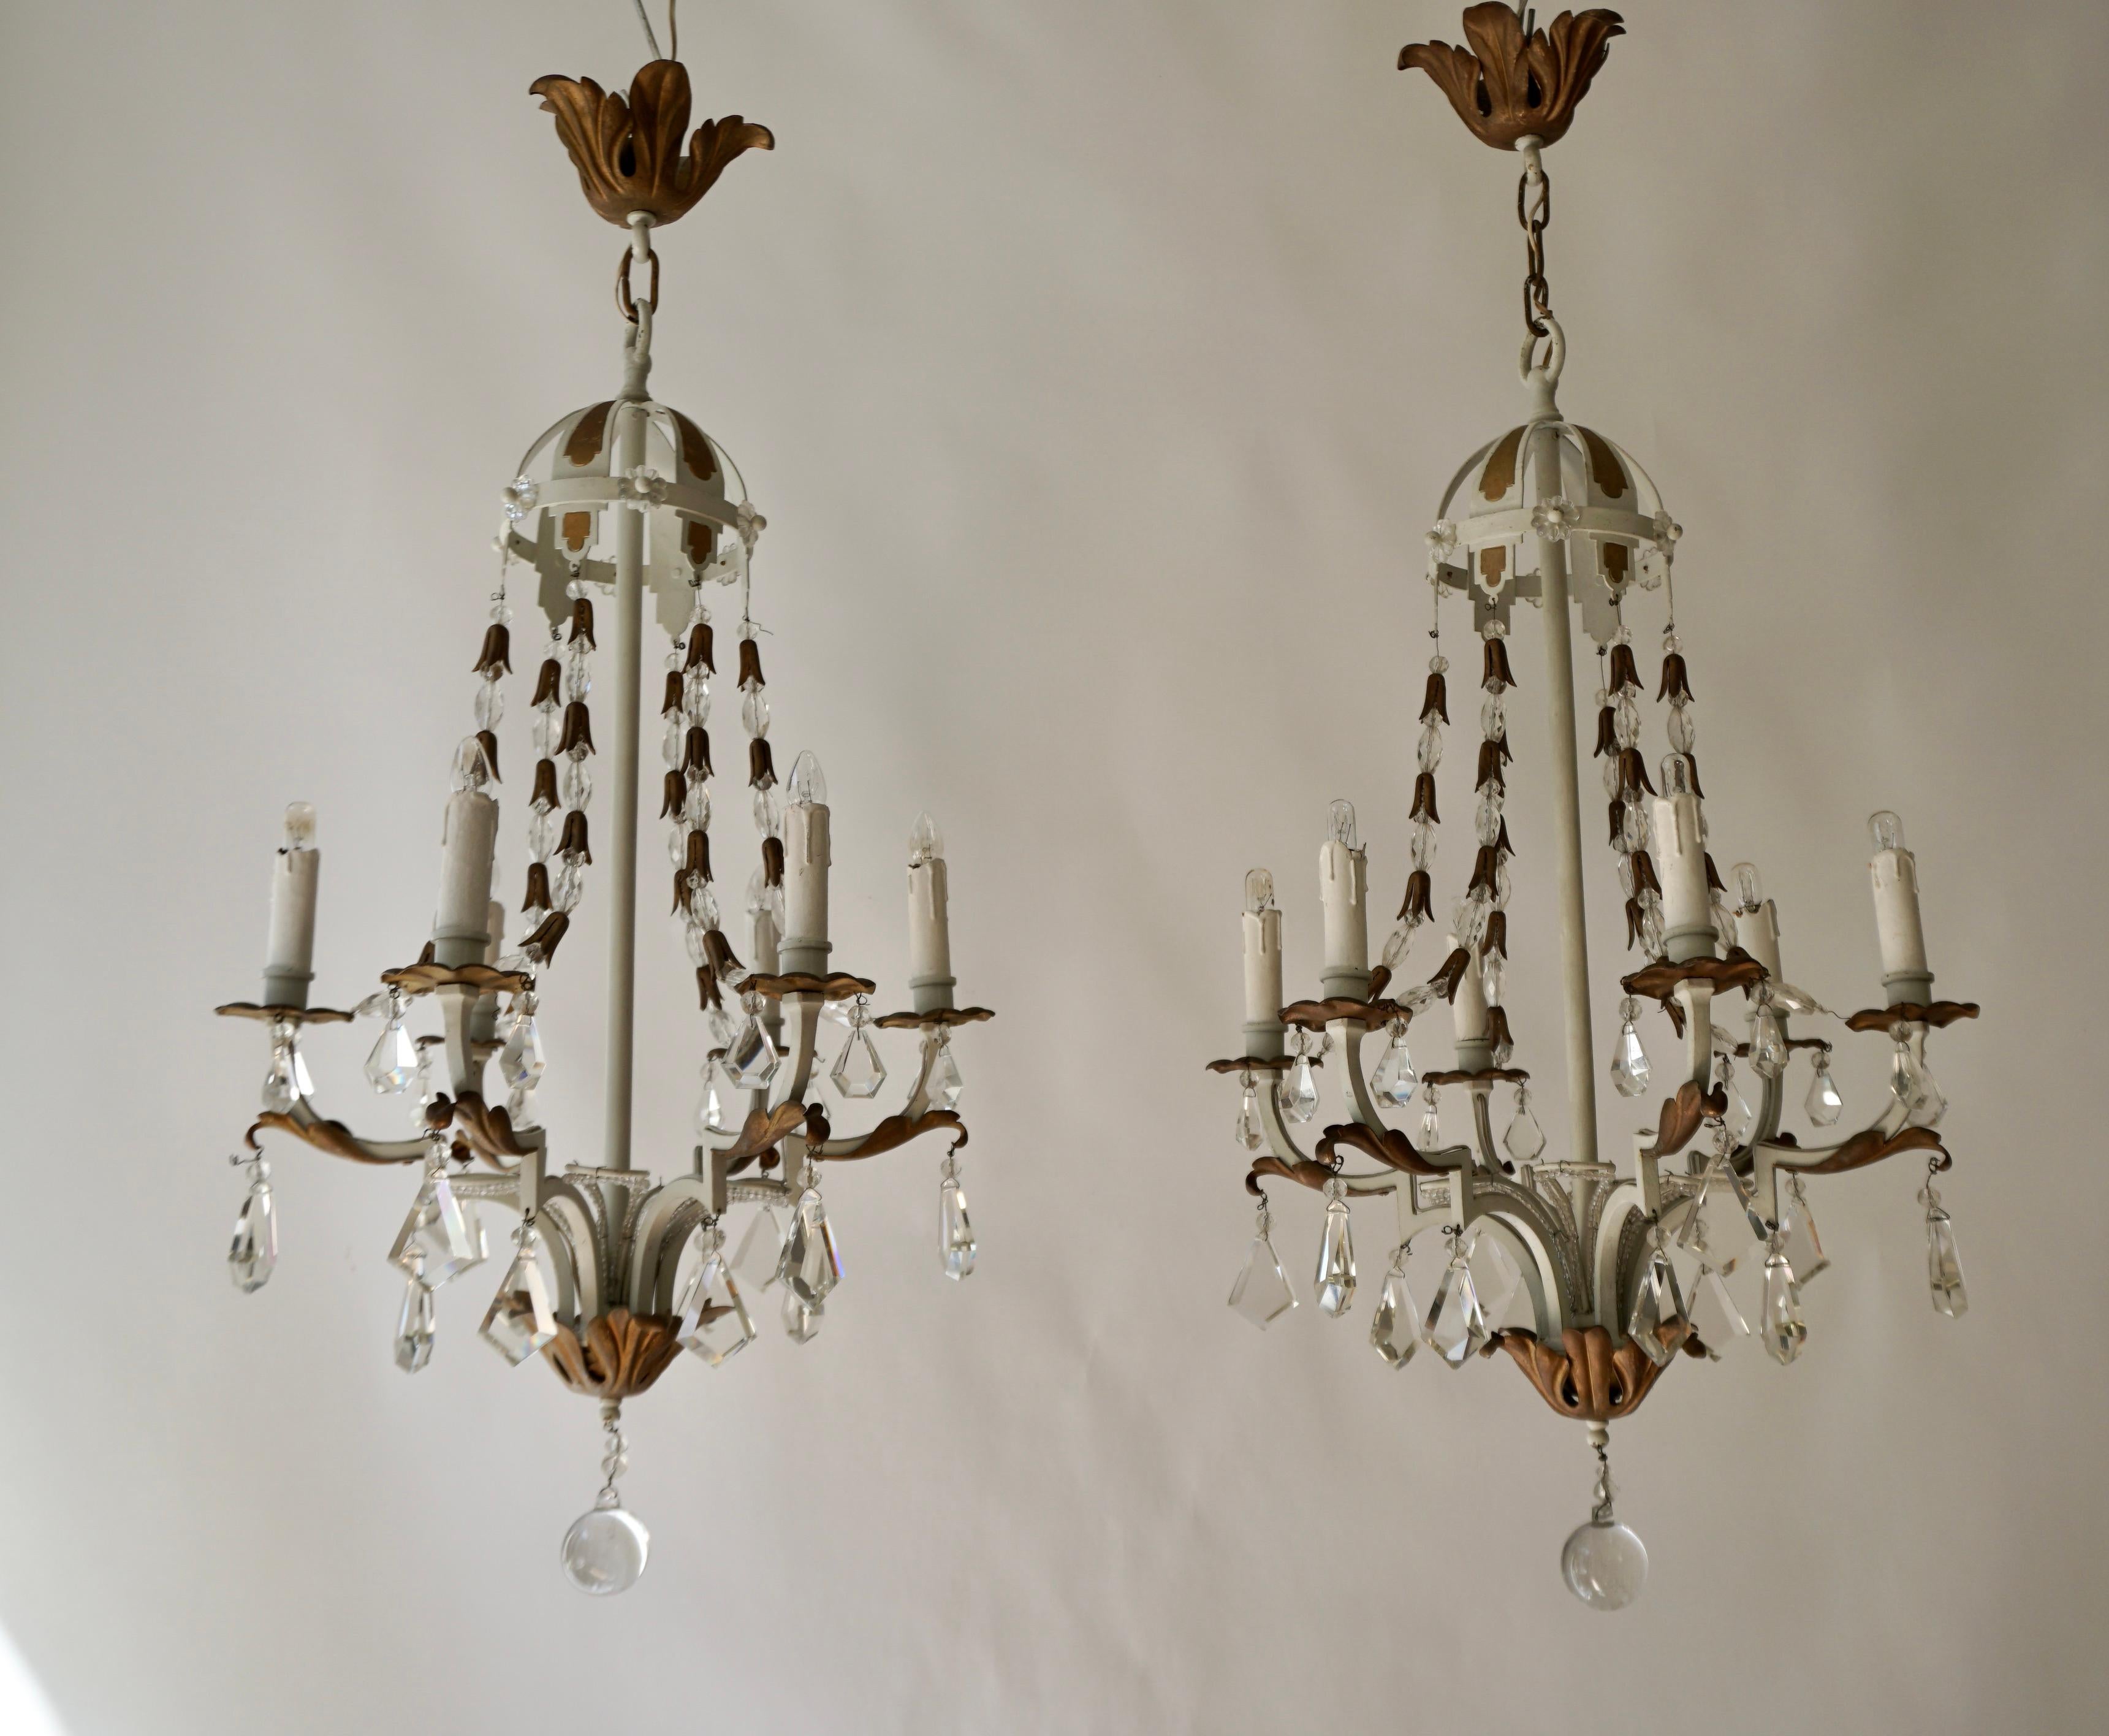 Two 6-light white/gold metal chandeliers decorated with brass acanthus leaves and hung with crystal icicles.
France ,20th century.

Diameter 18